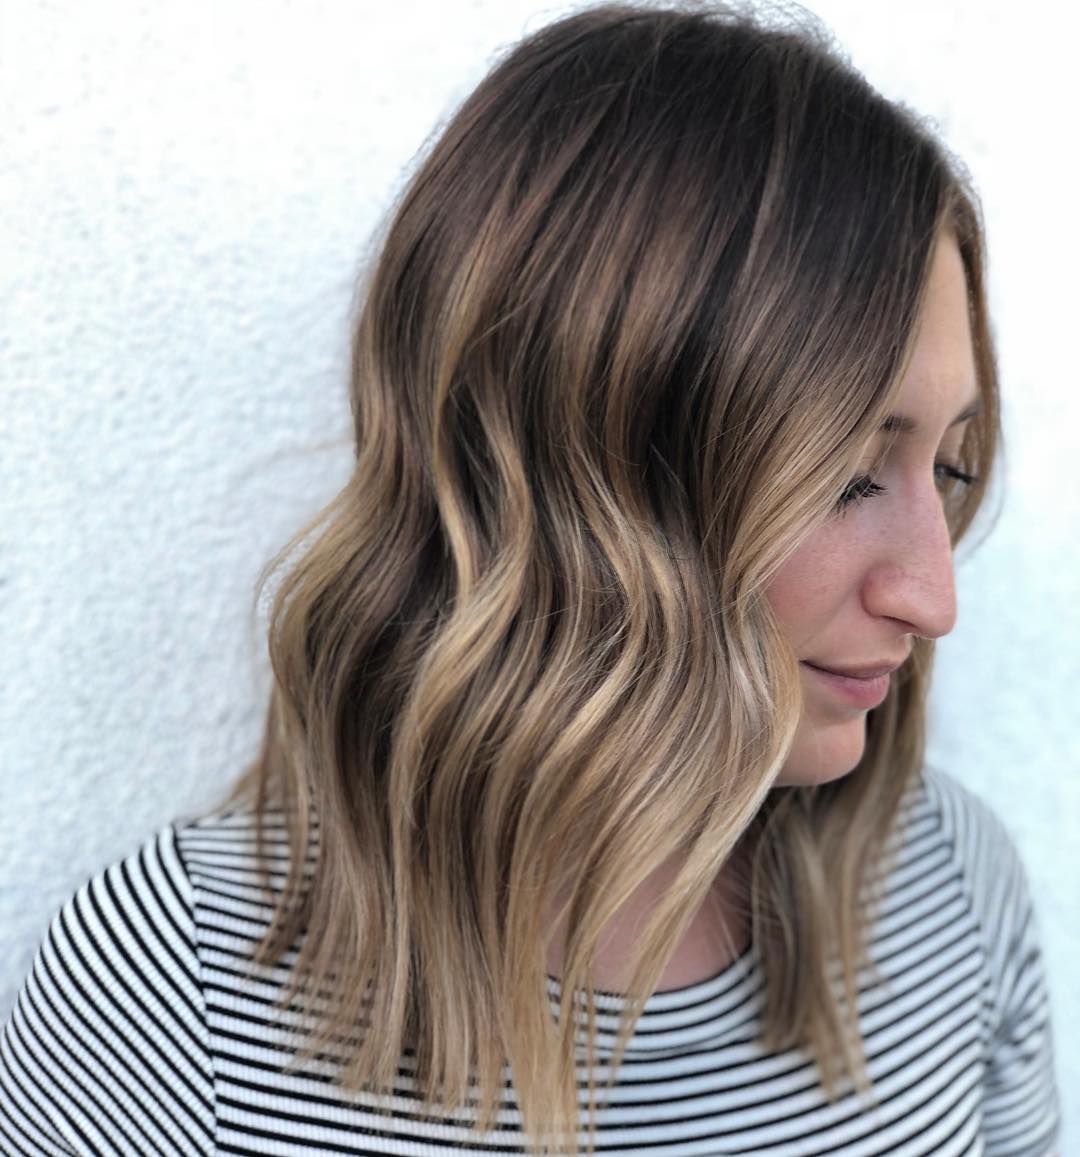 70 Amazing Long Wavy Bob Hairstyles You Should Try